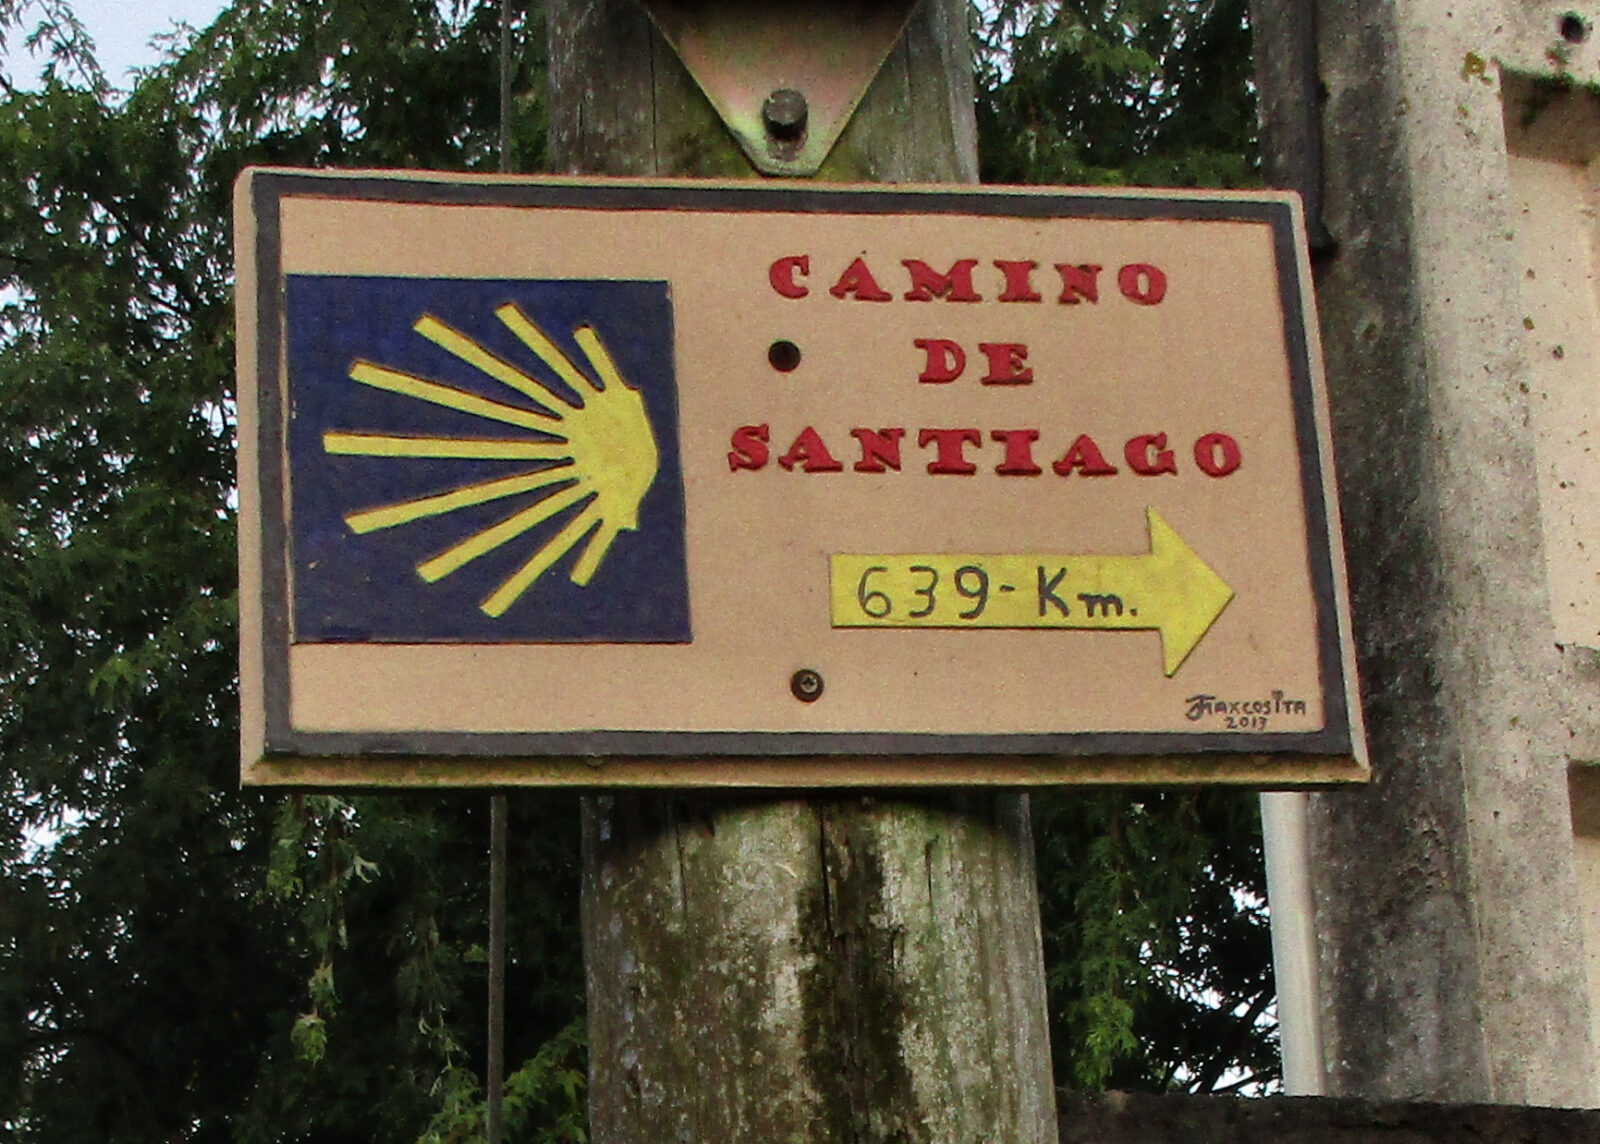 Camino direction sign showing that I had 639 kilometers to go.